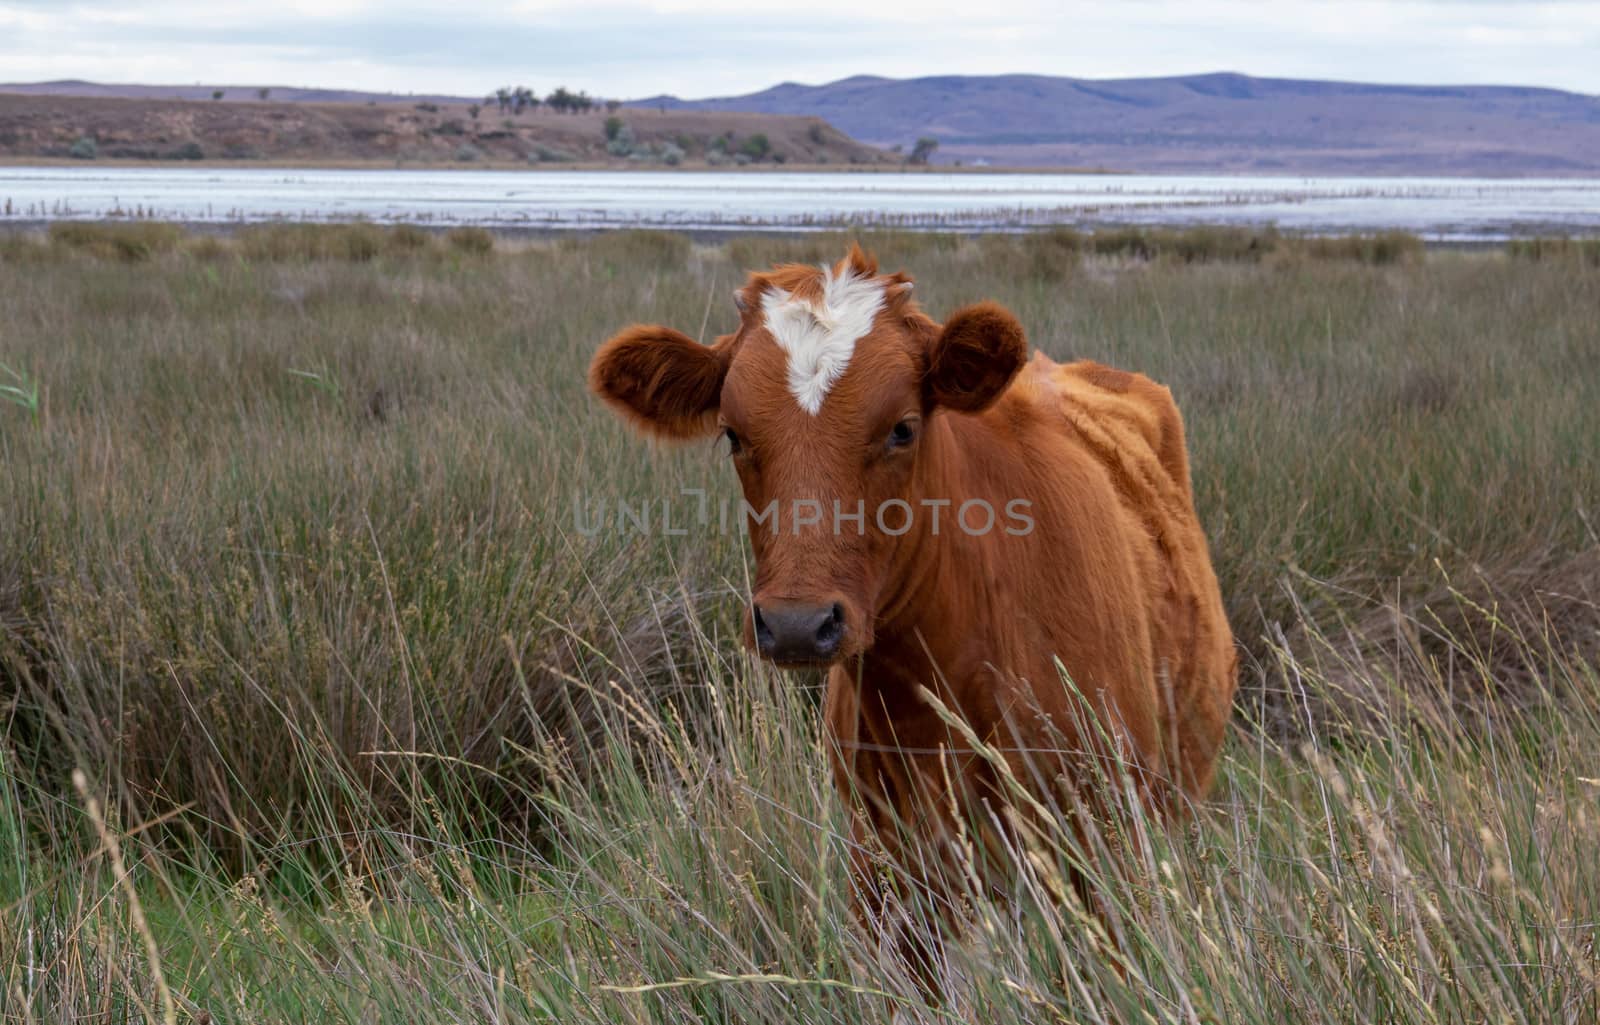 A brown cow with a heart-shaped spot on its forehead walks near a mud lake